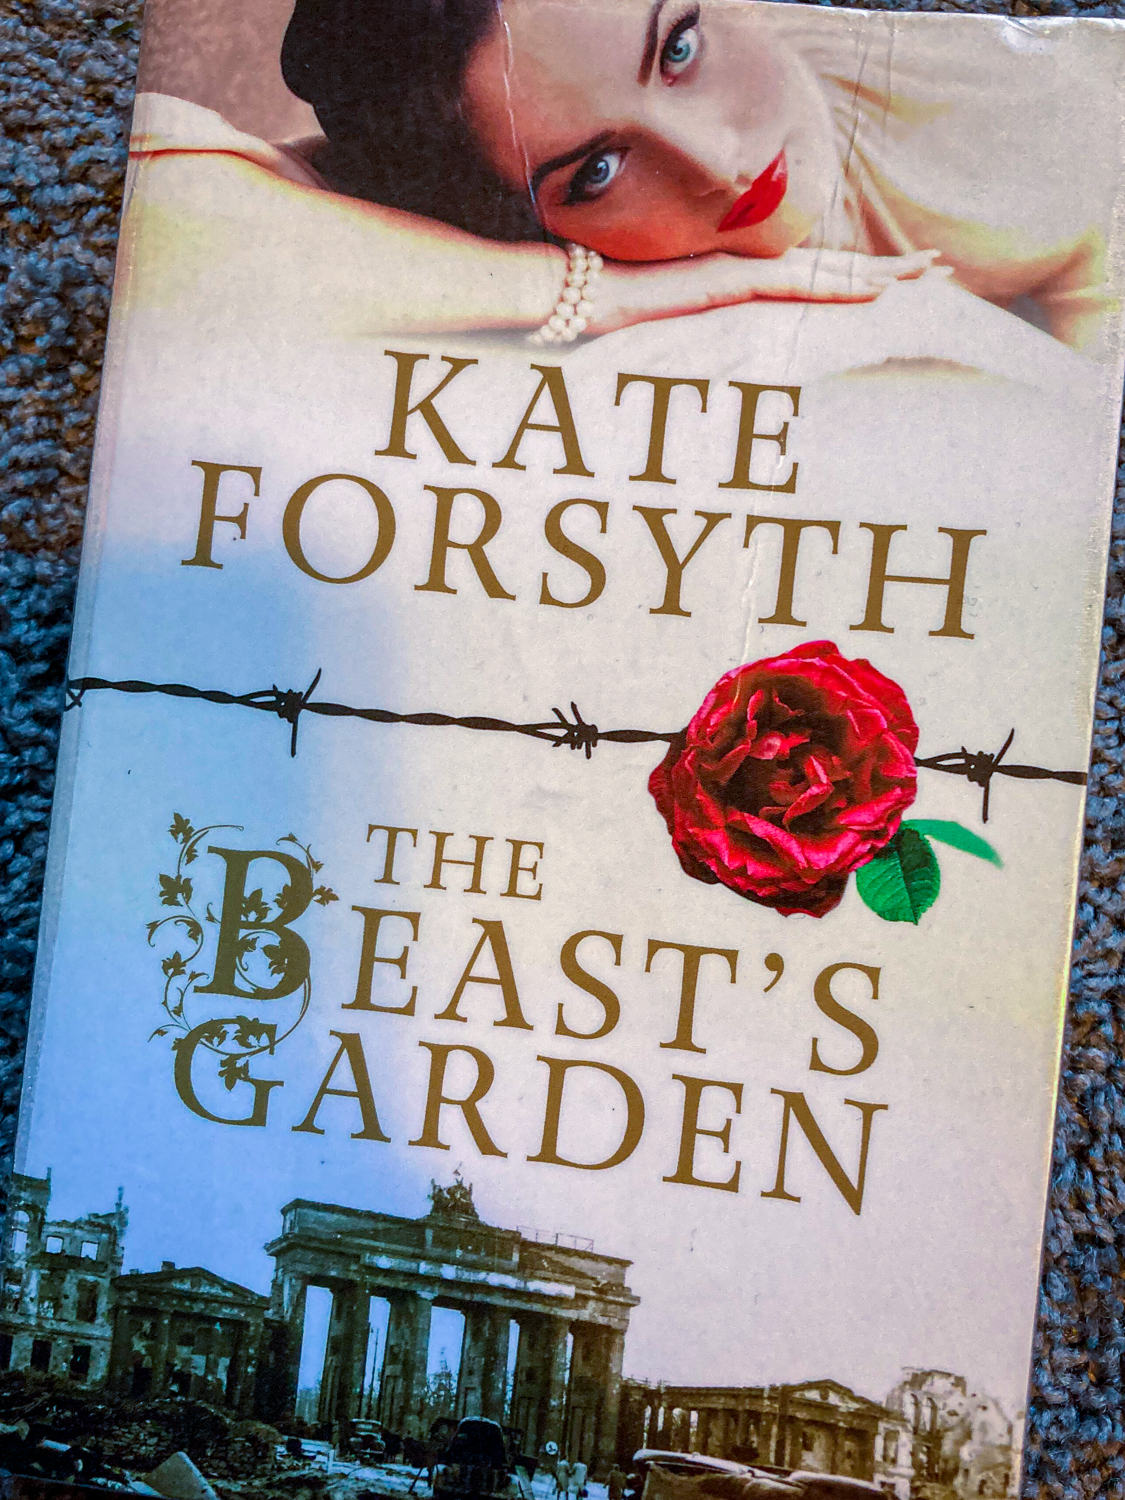 A book cover with the text Kate Forsyth The Beast's Garden. A dark-haried woman at the top, a red rose on barbeed wire across the centre and a scene from Berlin's Brandenburg Gate at the bottom